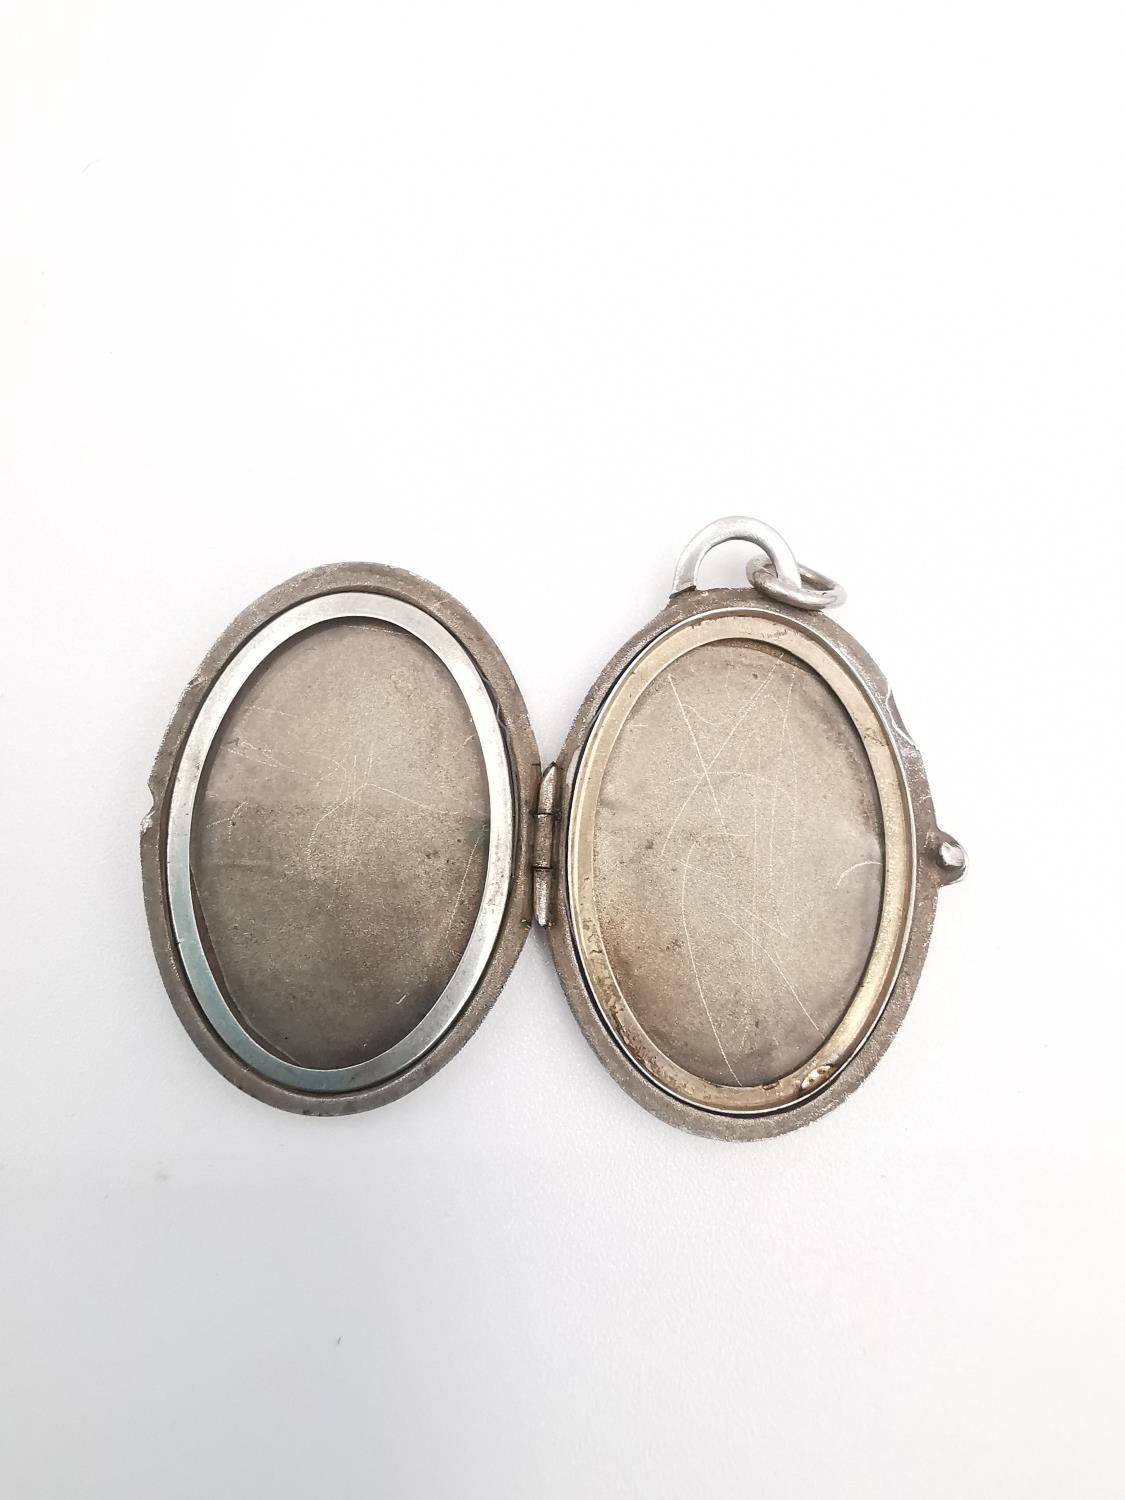 A heavy sterling silver oval locket with stylised scrolling foliate design with cross hatch design - Image 6 of 8